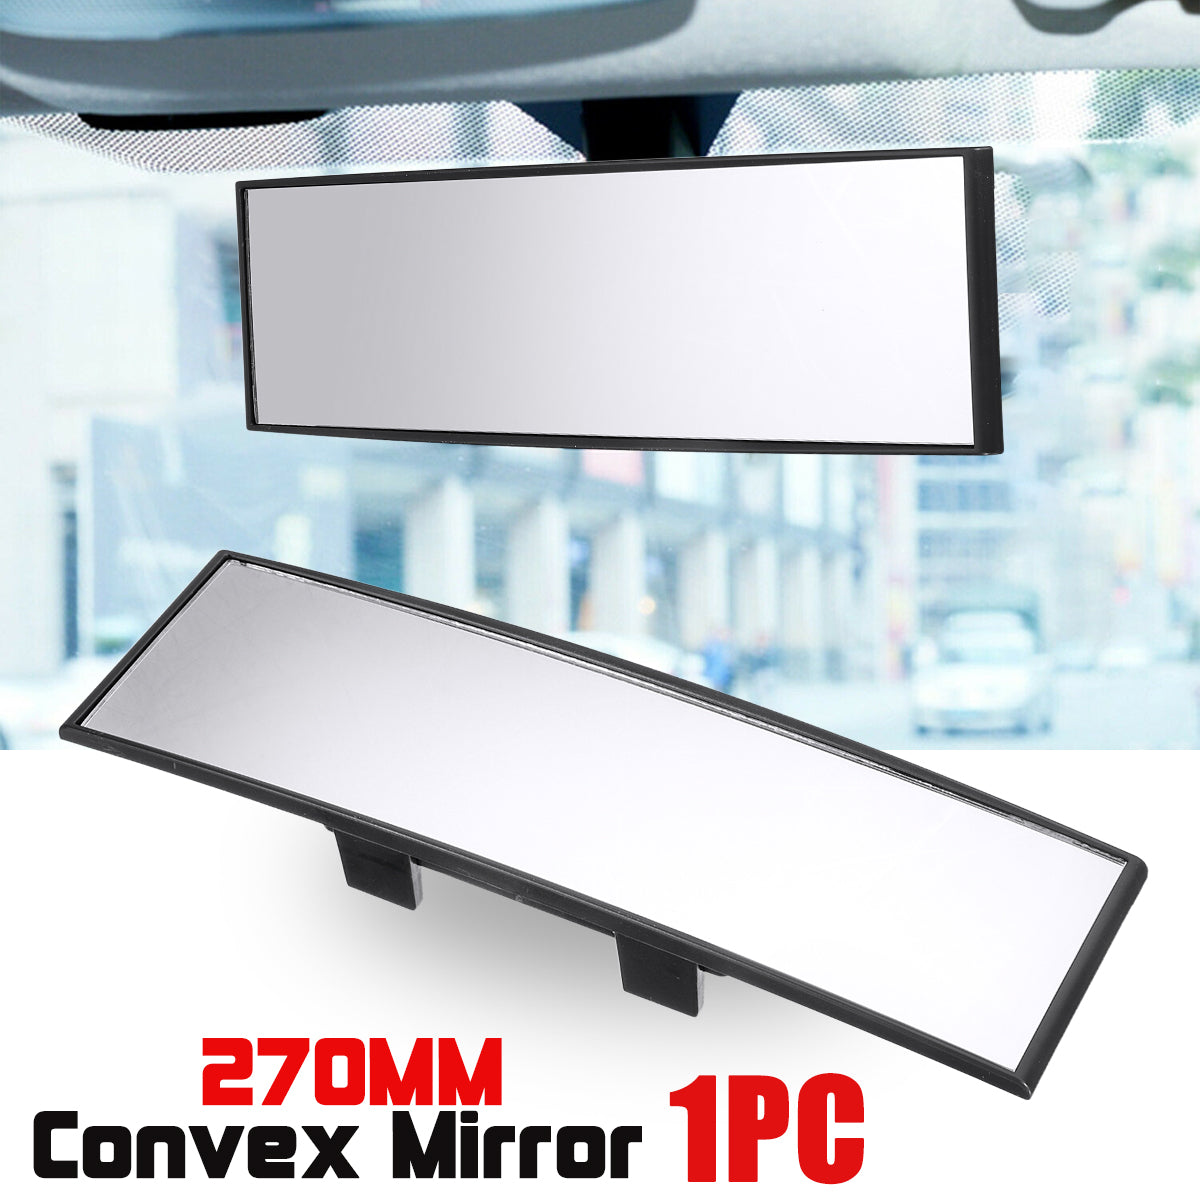 Lavender Car Interior Panoramic 270mm Convex Rear View Rearview Mirror Universal Clip On